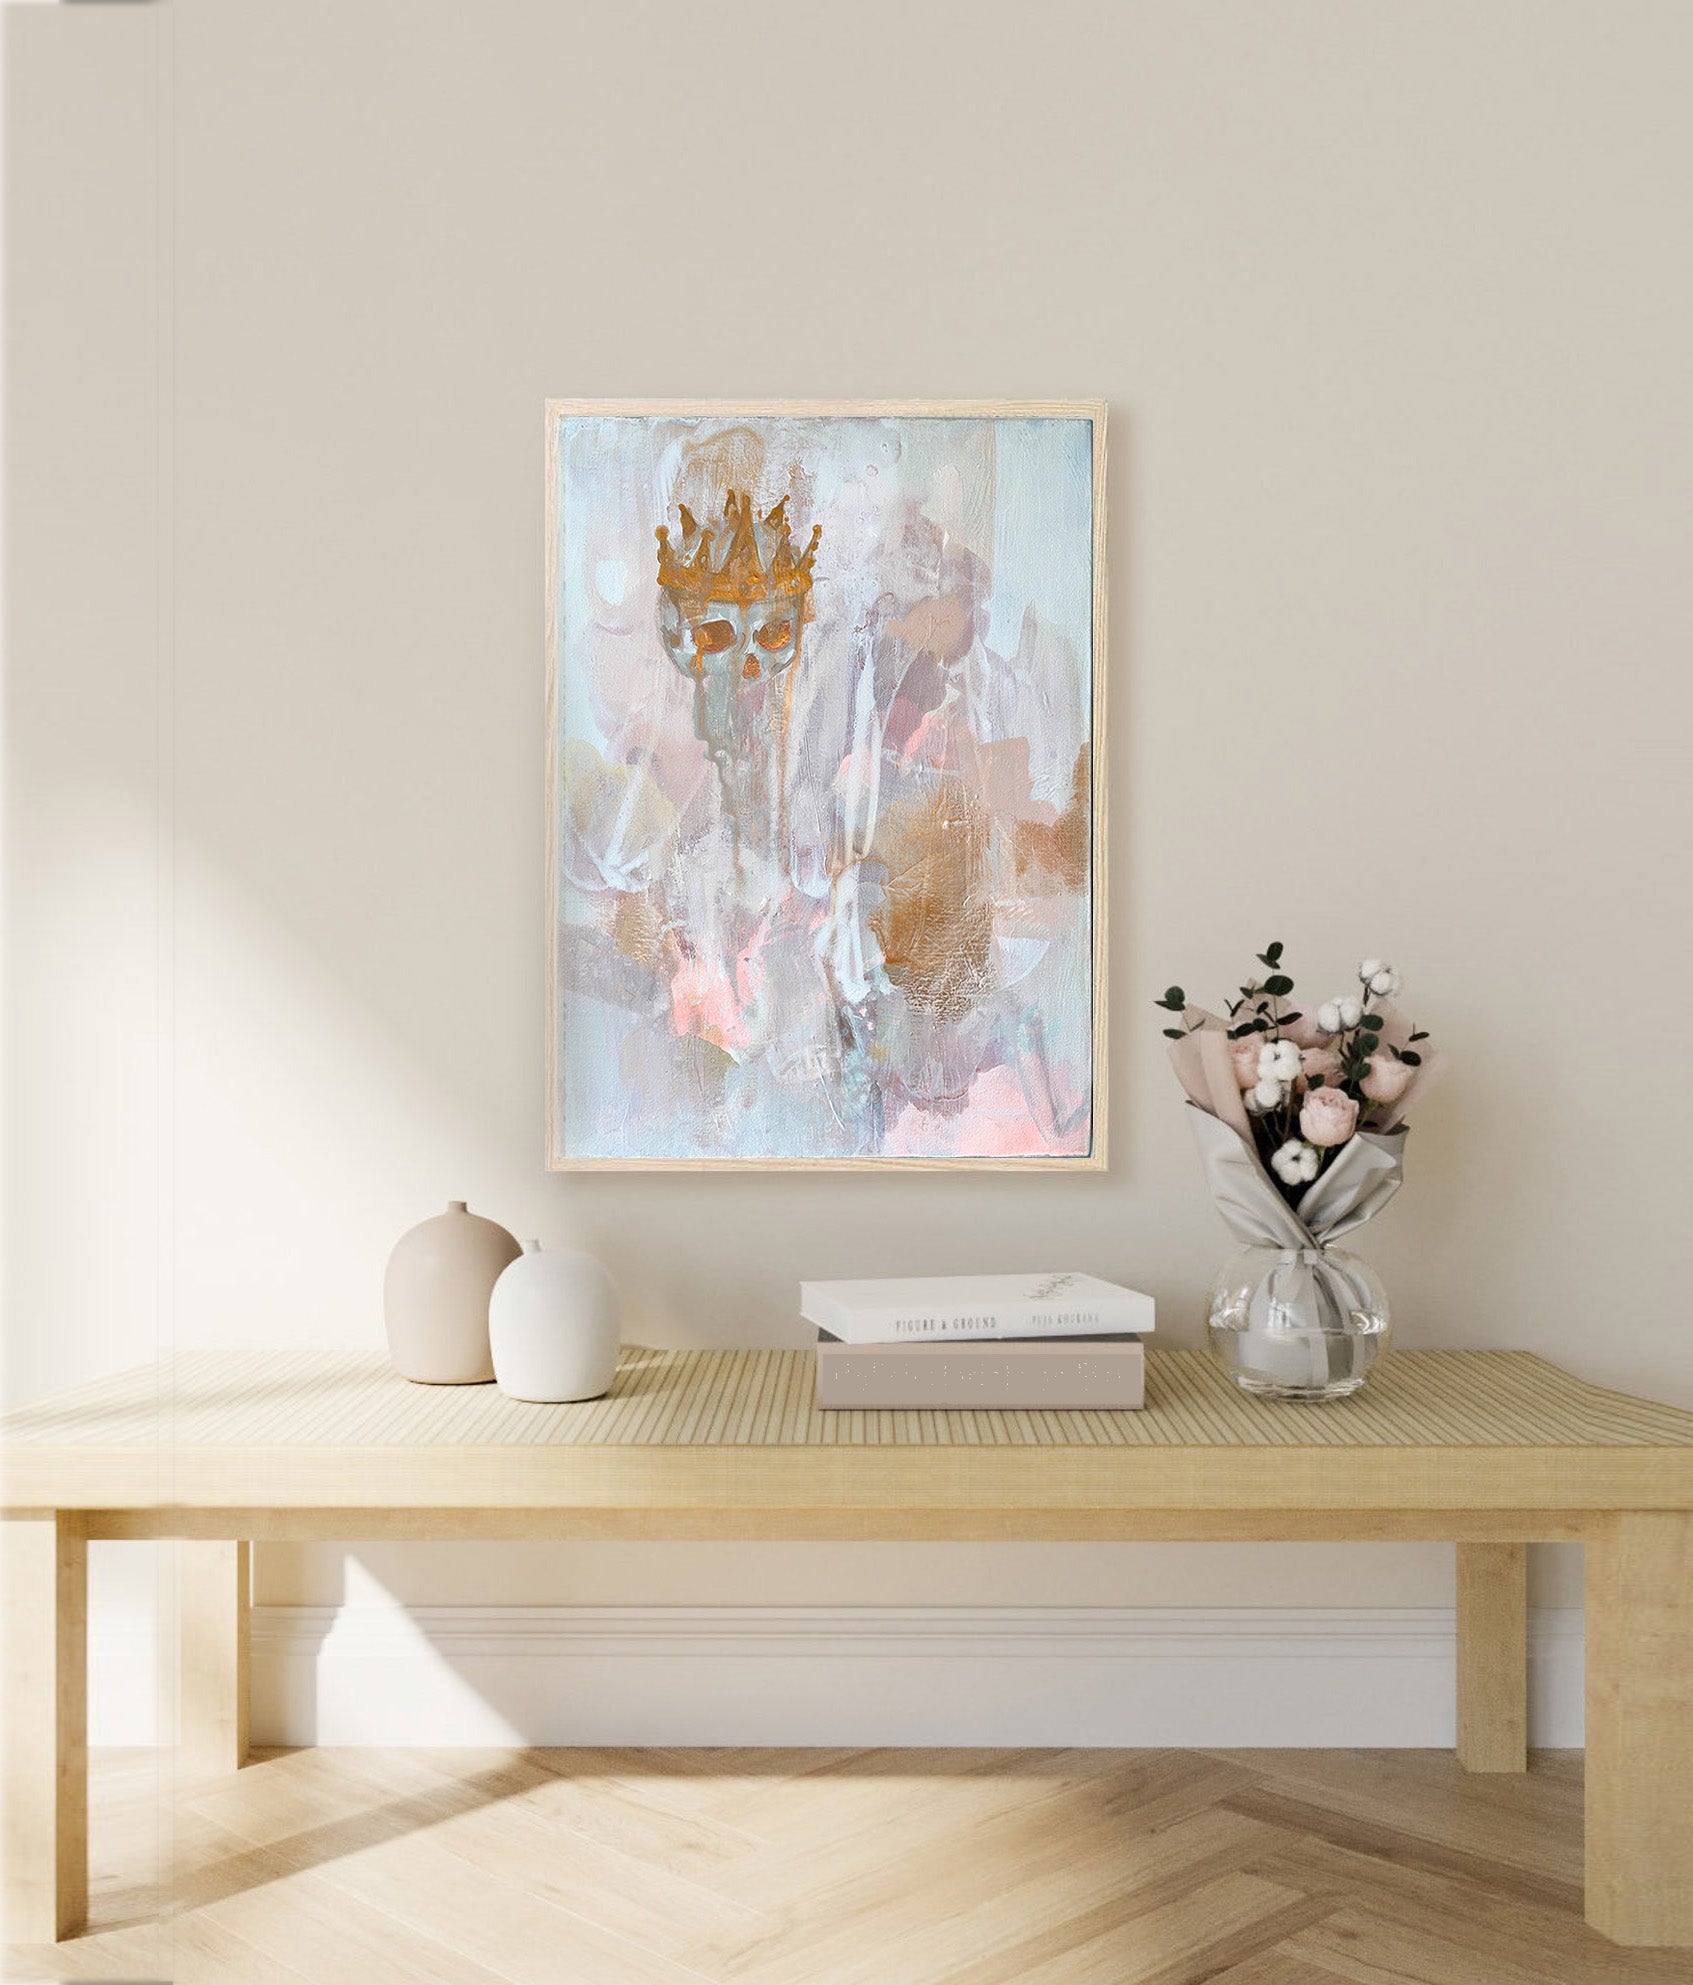 Neutral warm color palette for living room. Painting is abstract with a gold skull. 